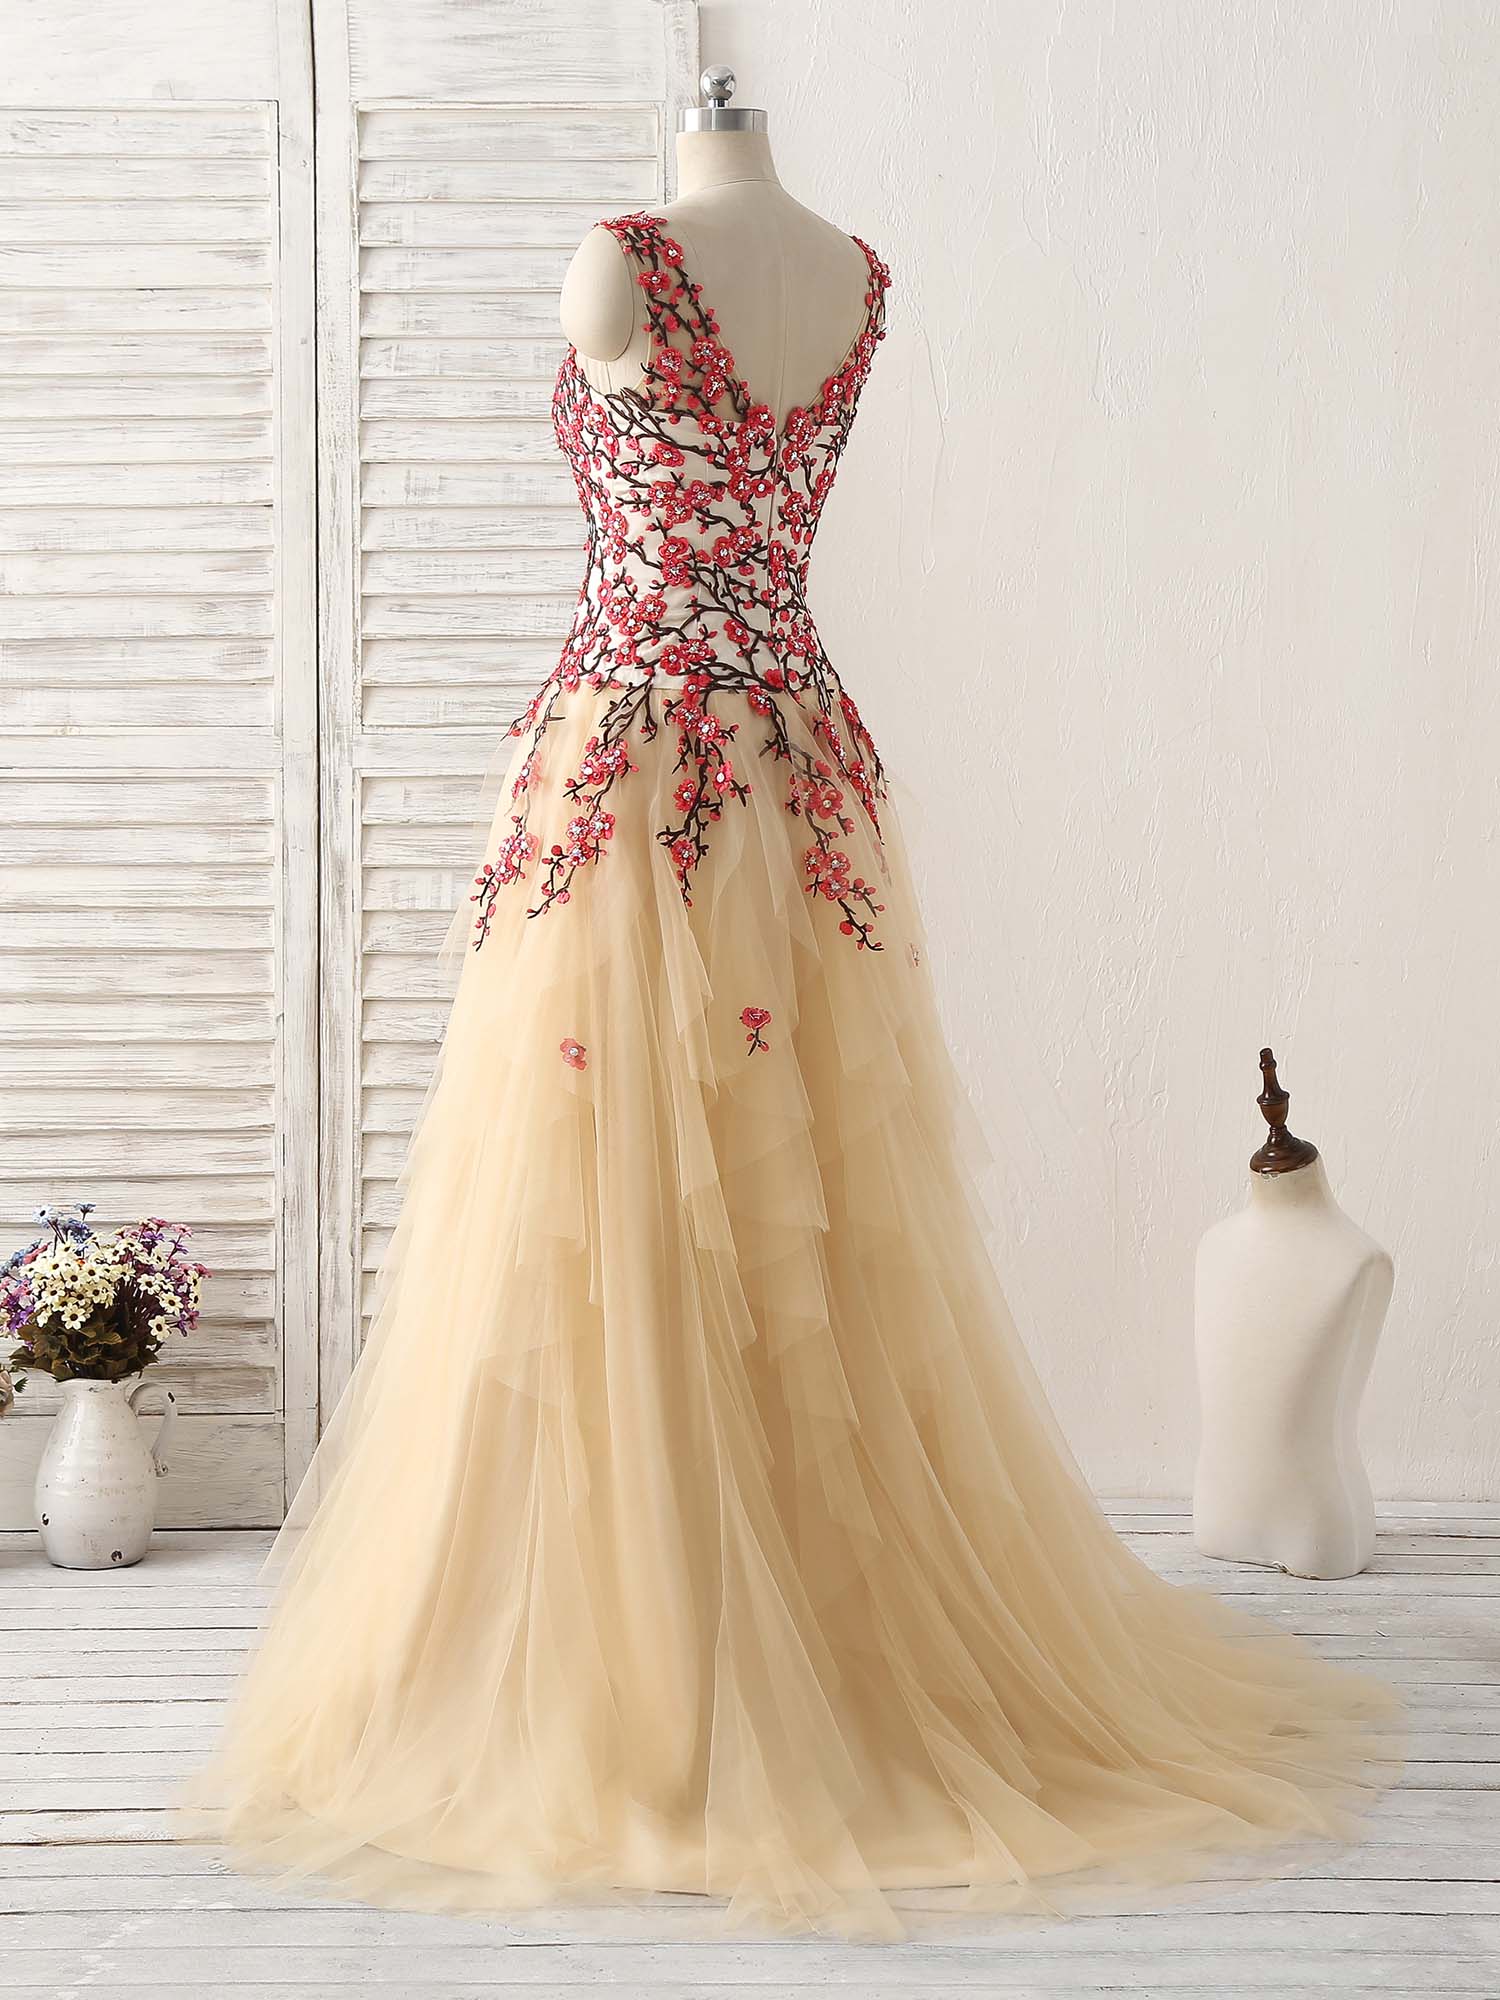 Prom Dress Shops Near Me, Champagne Tulle Long Prom Dress Lace Applique Evening Dress